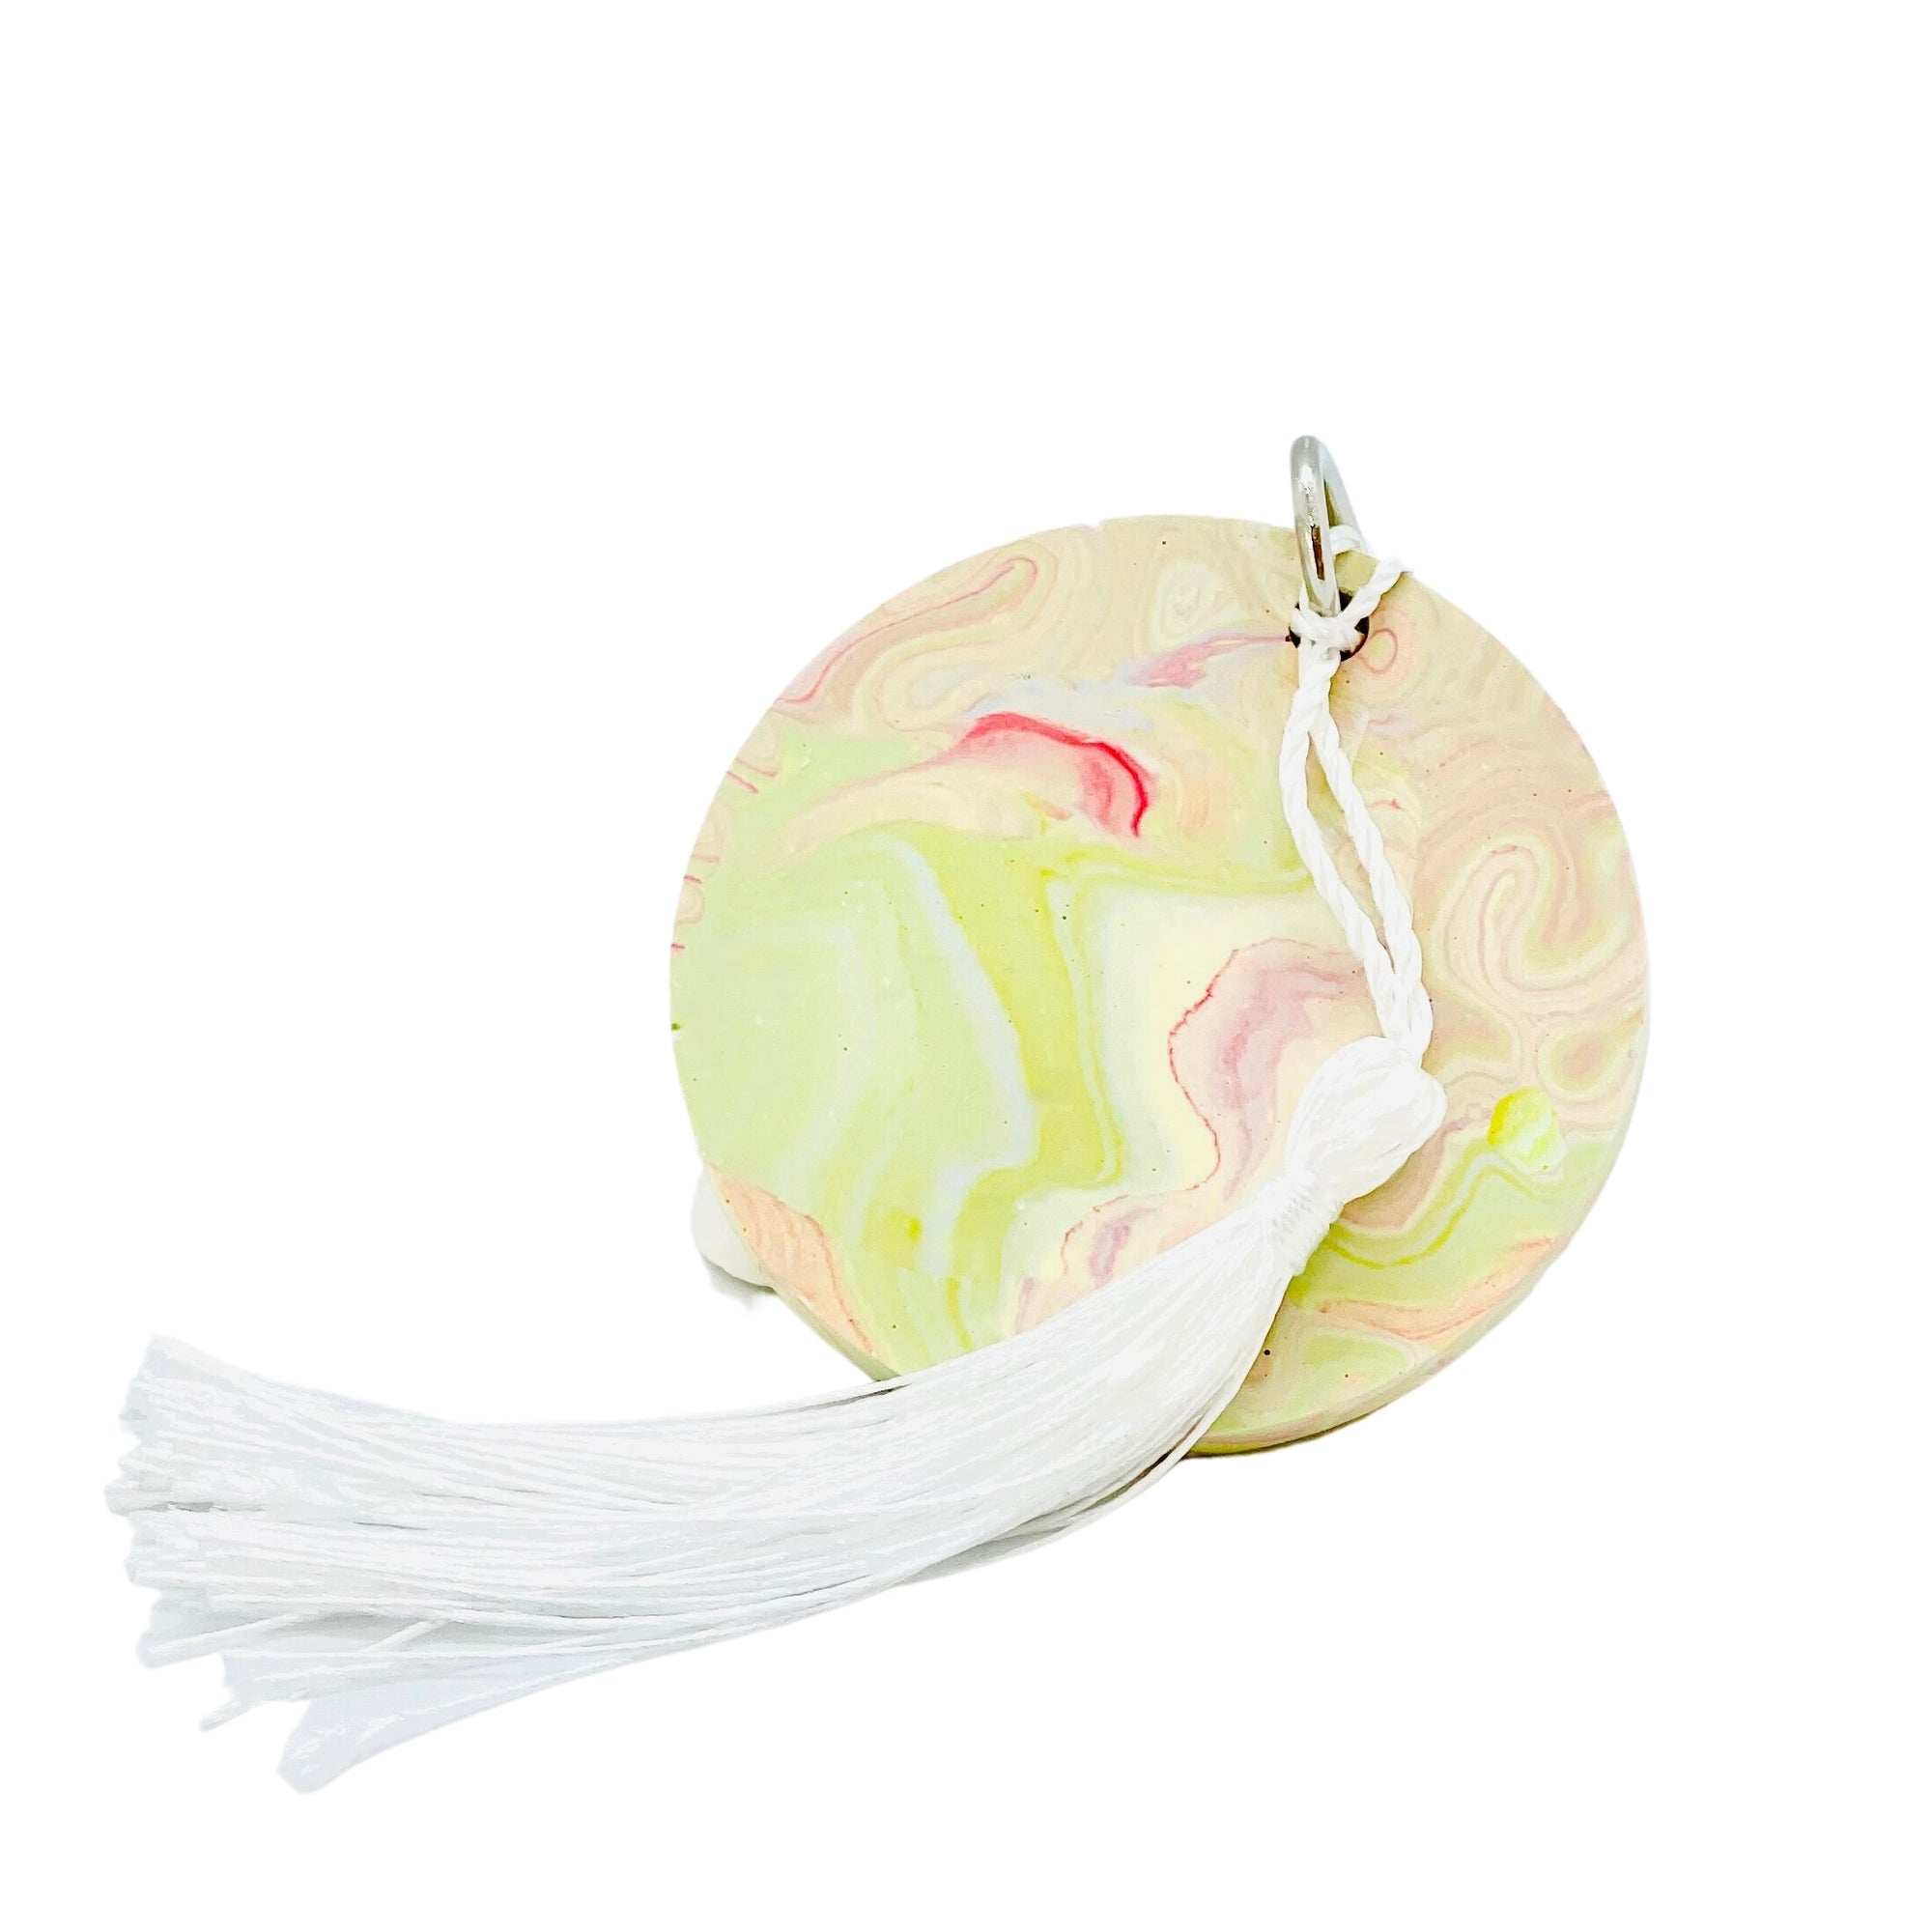 A round Jesmonite disc keyring measuring 6cm in diameter marbled with magenta and lime green pigment.